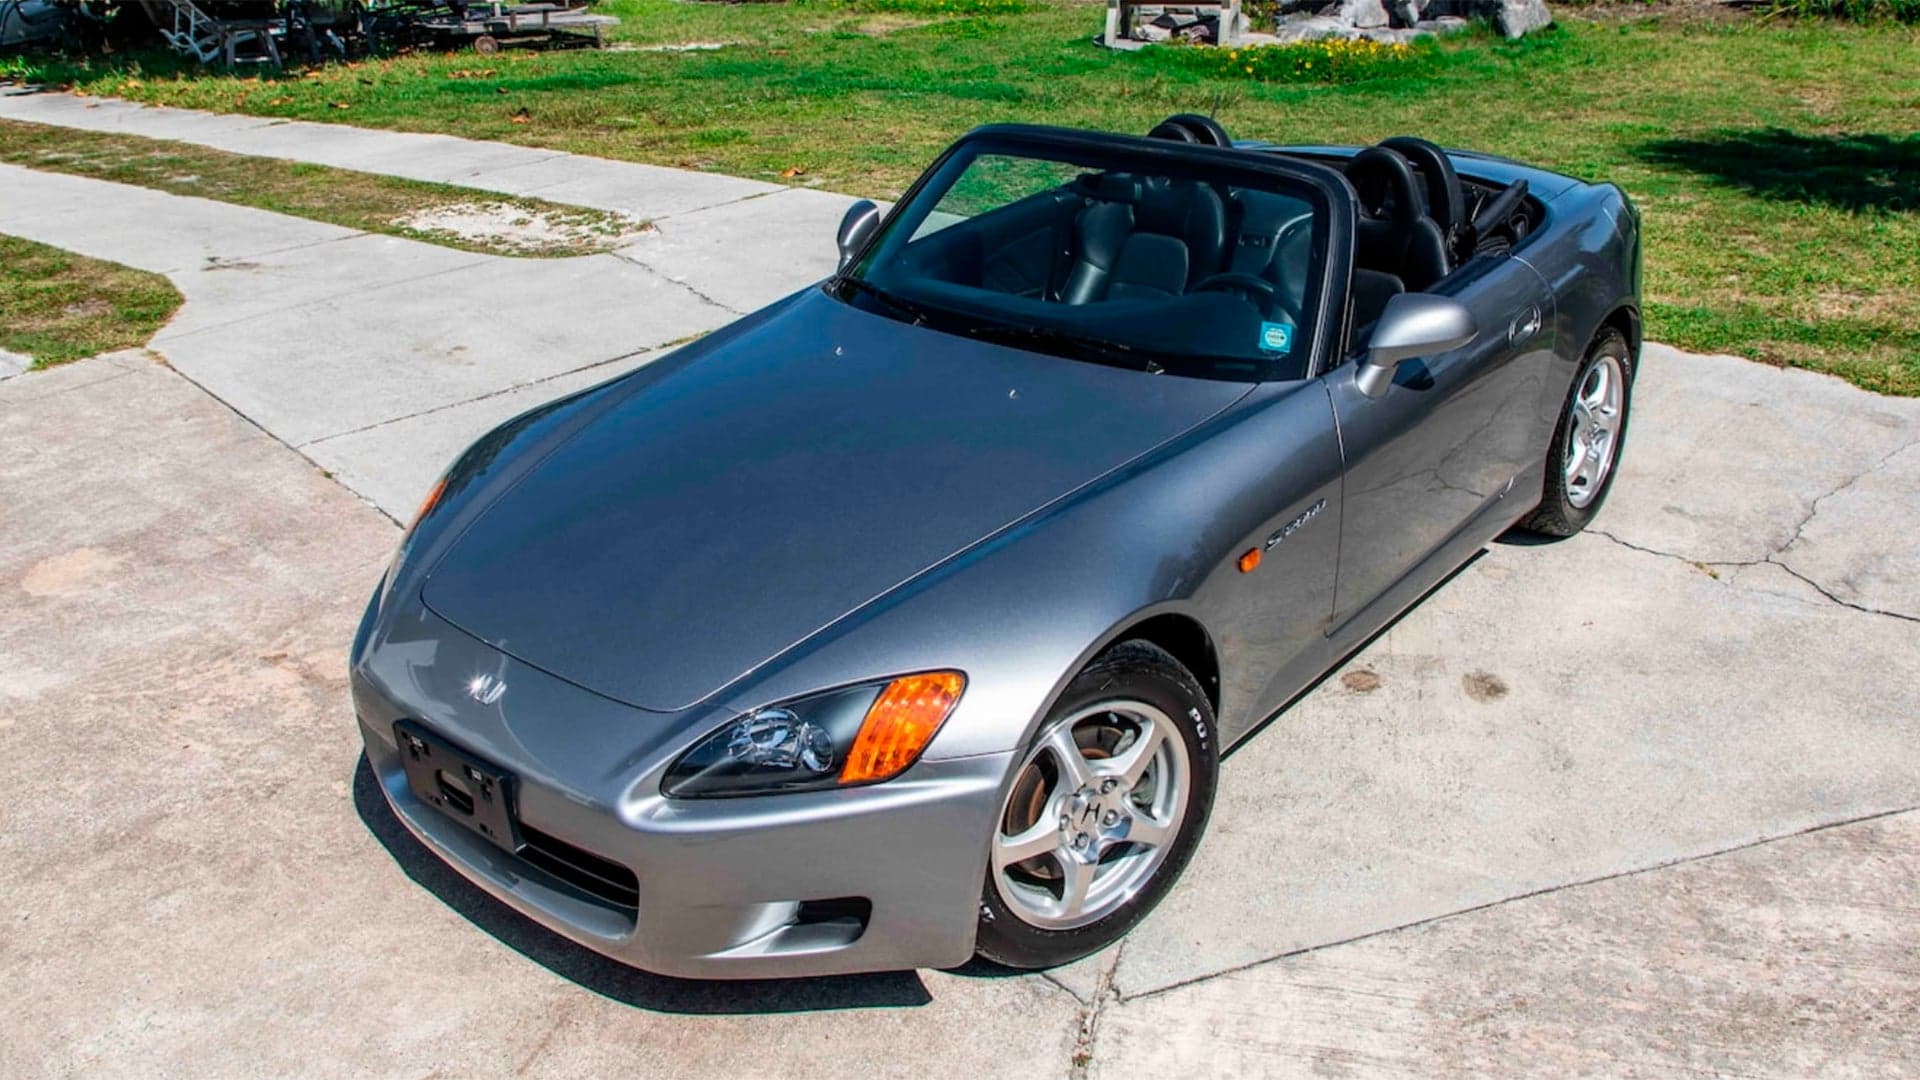 How This Brand New, 34-Mile Honda S2000 Got Parked for 20 Years